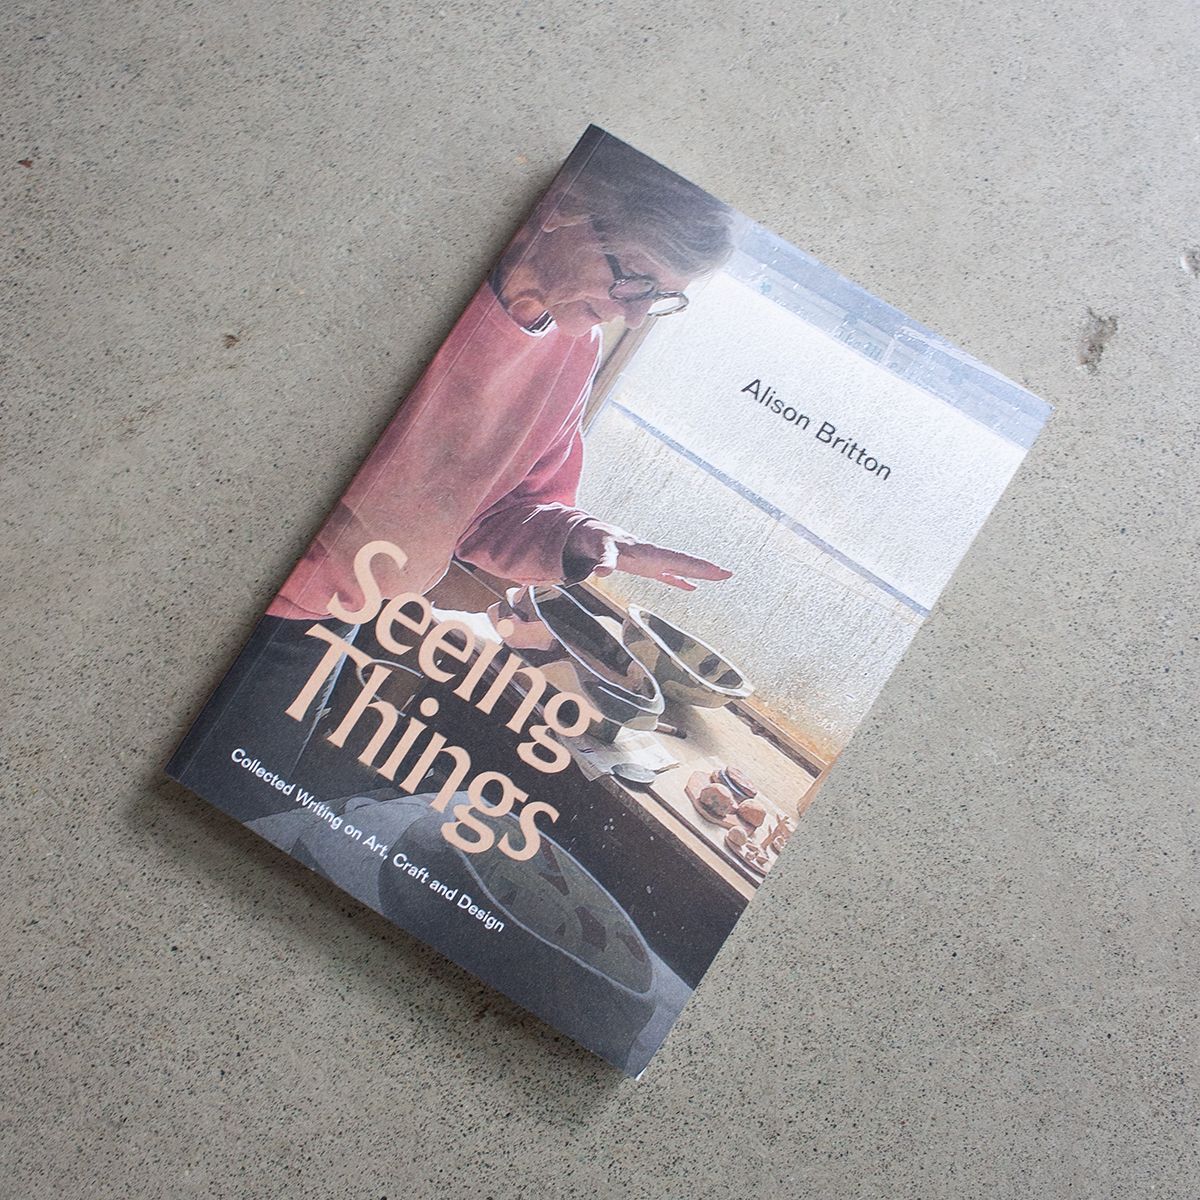 Book titled "Seeing Things" by Alison Britton placed on a grey textured surface. The cover features a photograph of an older woman in a pink sweater and glasses, working with ceramic pieces. The subtitle reads "Collected Writing on Art, Craft and Design."